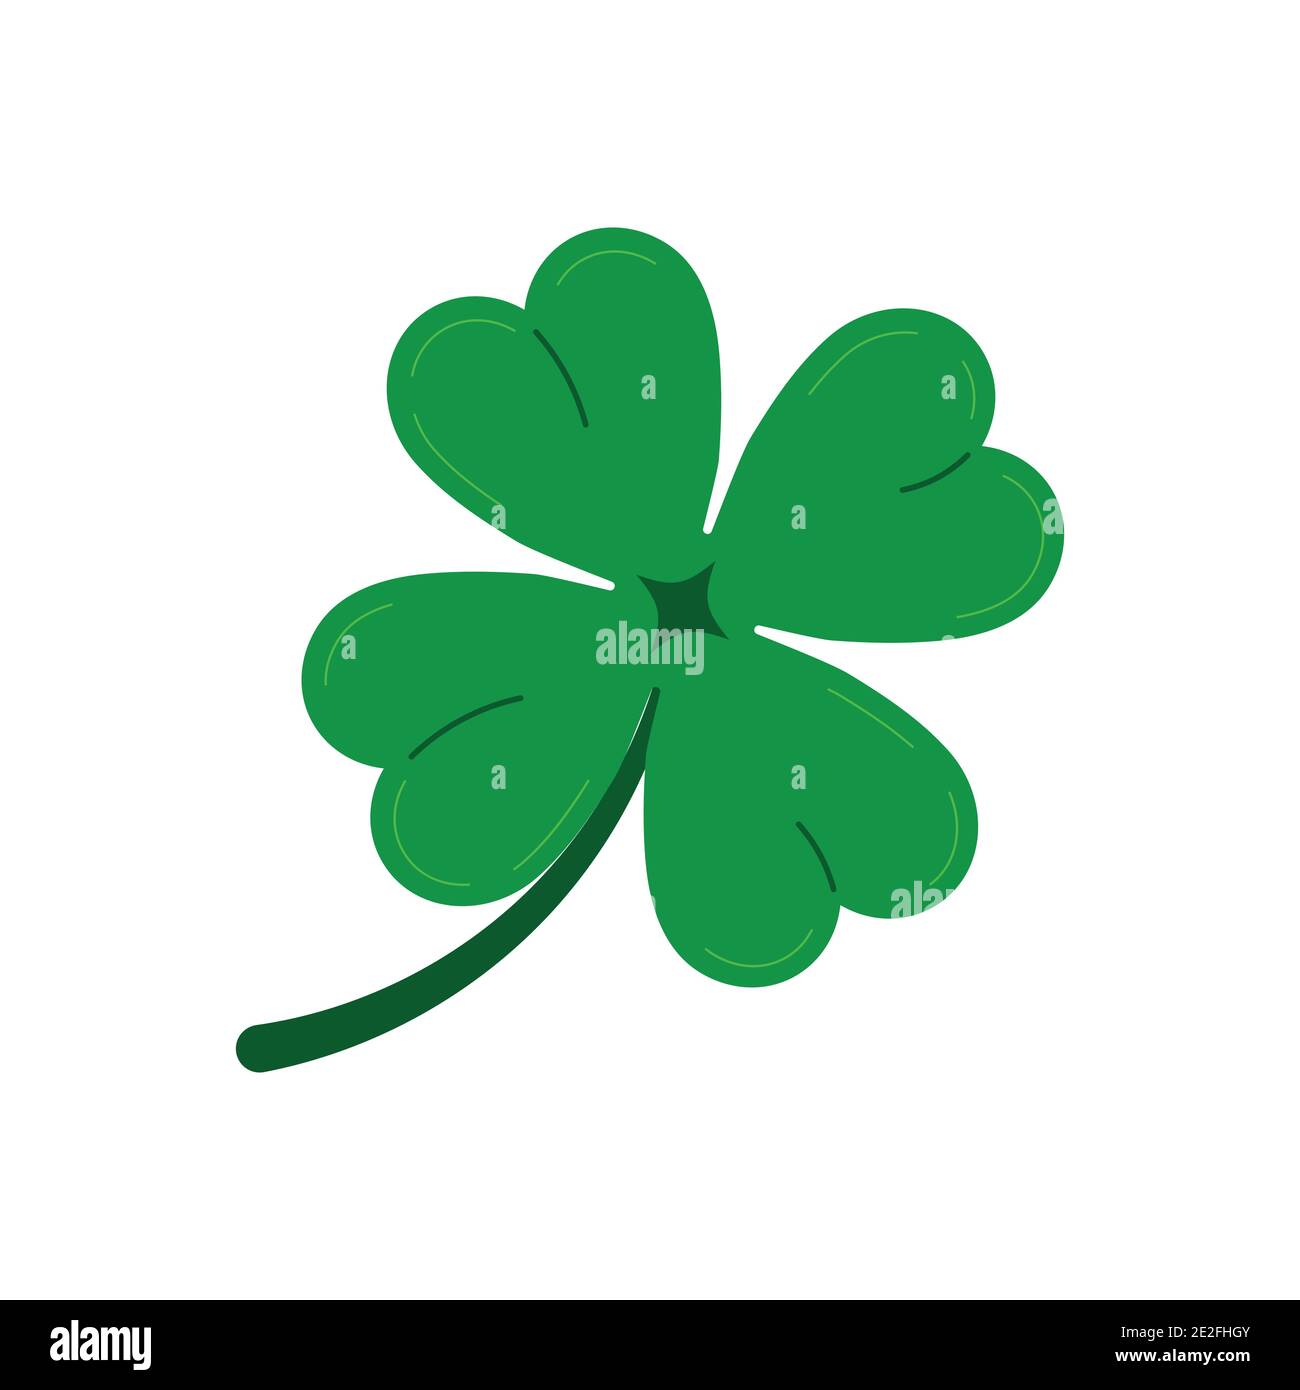 Clover four leaf icon isolated on white background. Stock Vector